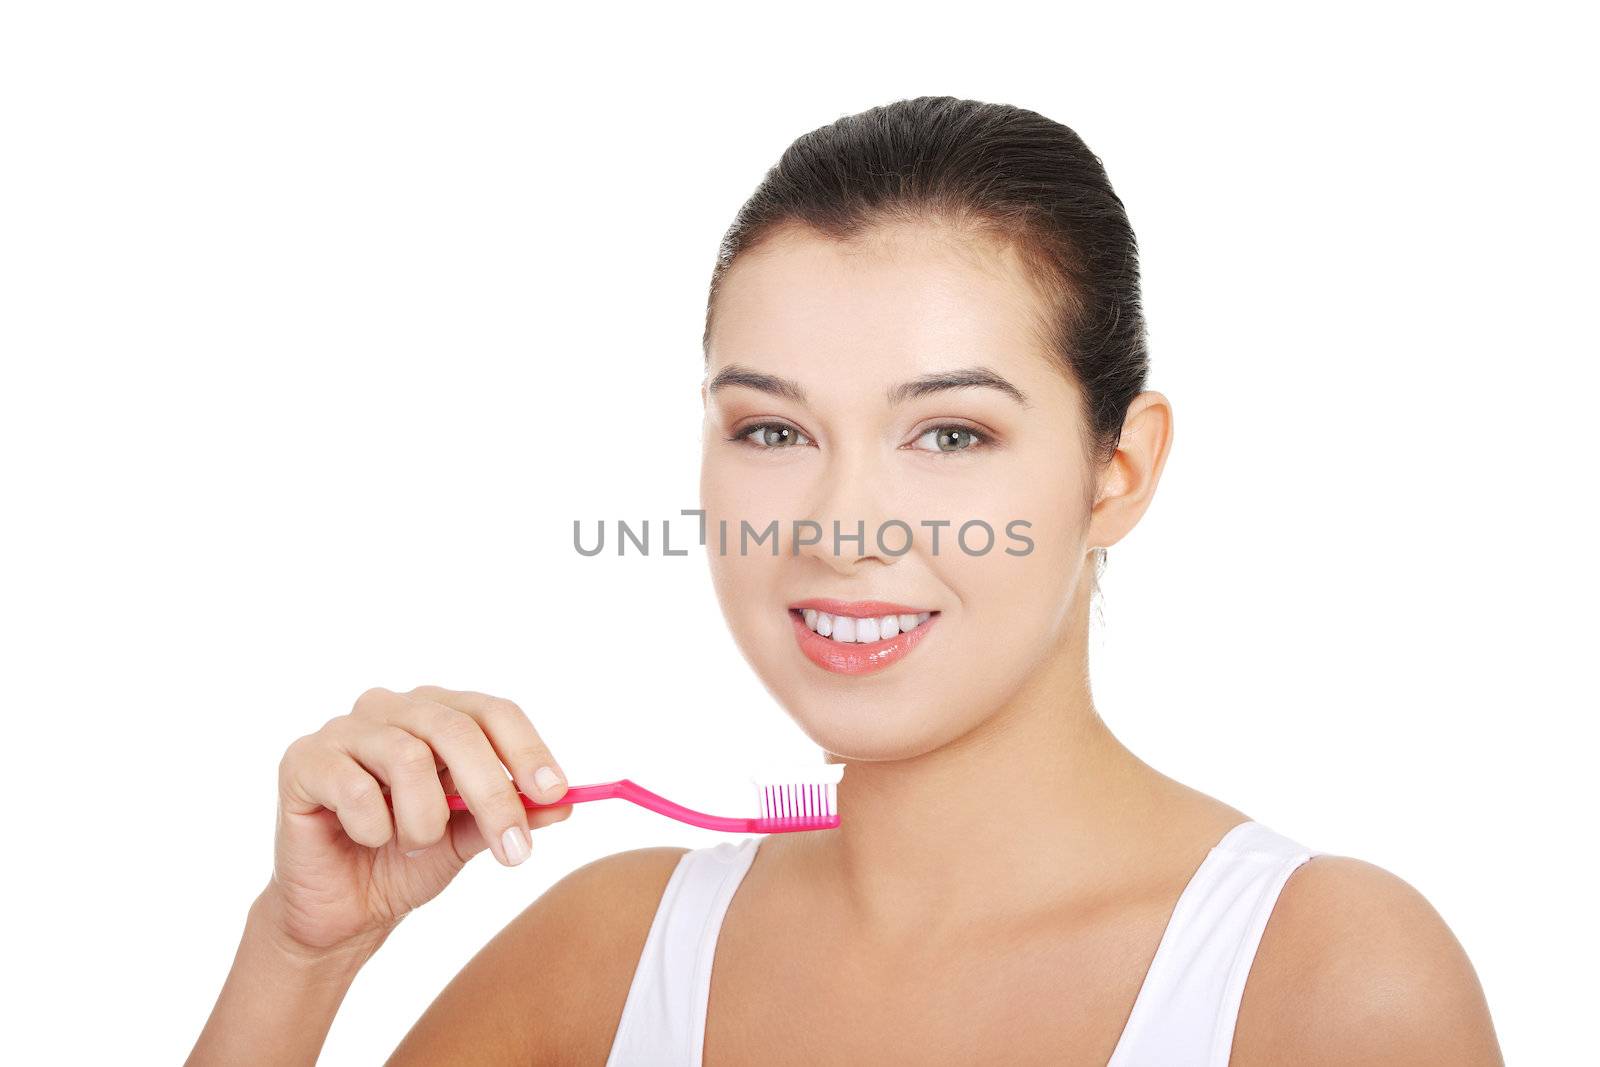 Woman with great teeth holding tooth-brush, isolated